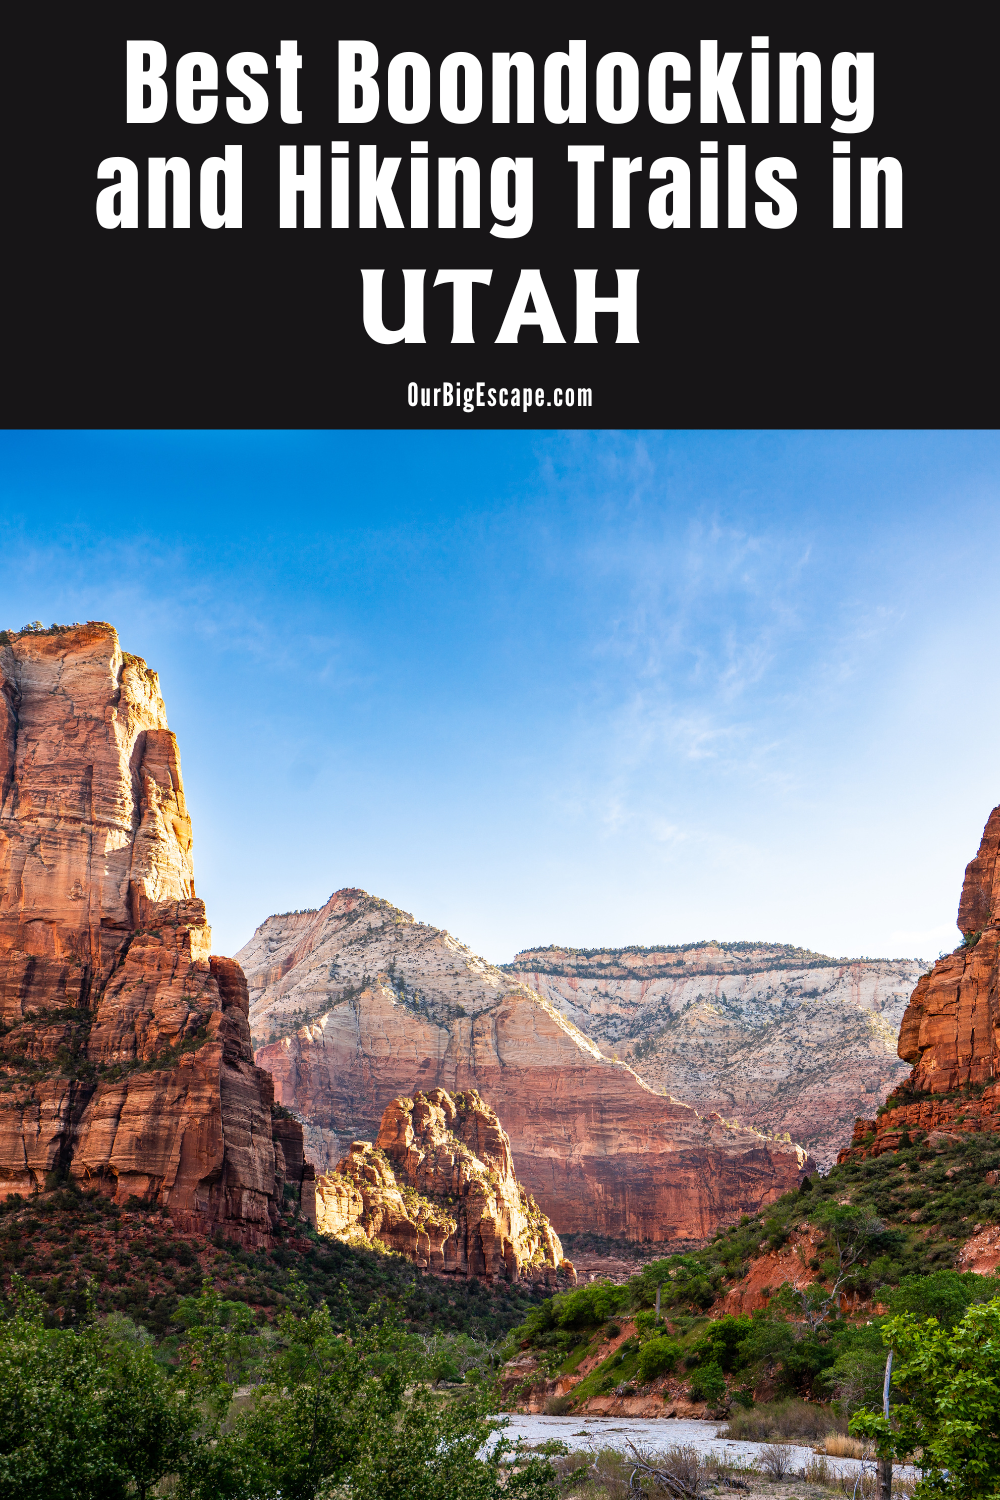 Best Boondocking and Hiking Trails in Utah